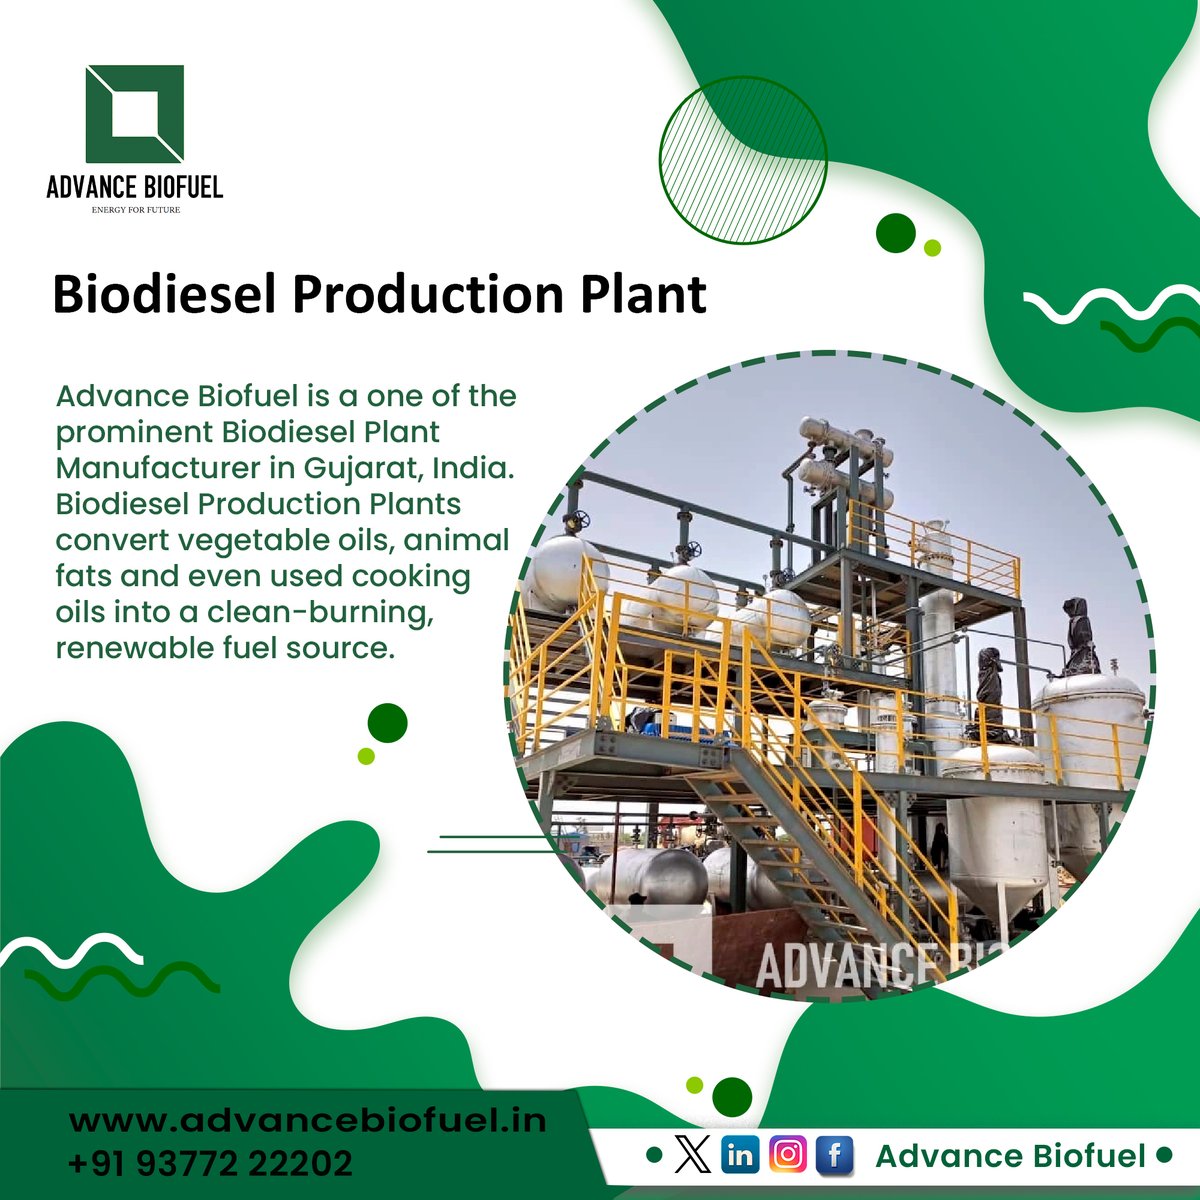 Transforming waste into wonder at our Biodiesel Production Plant! 🌿🔧 Join the green revolution and ride the eco-friendly wave with us.

#AdvancedBiofuel #BiodieselProduction #RenewableEnergy #SustainableFuel #GreenTechnology #BiofuelPlant #CleanEnergy #AlternativeFuel